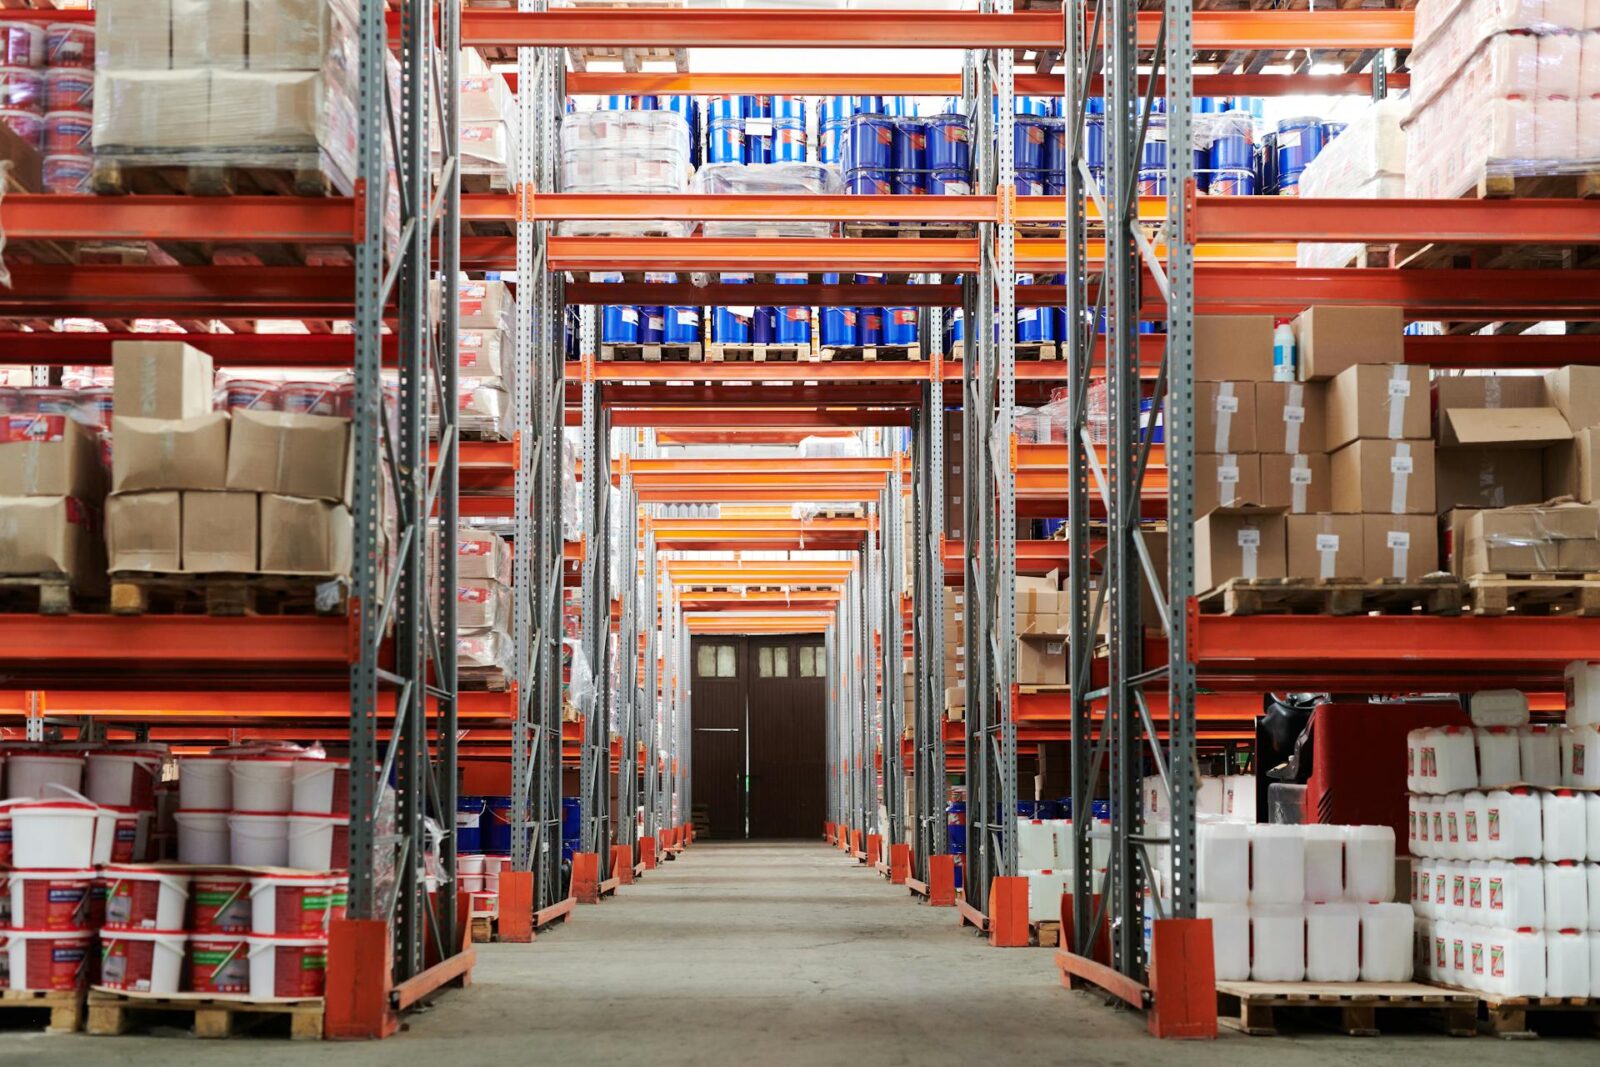 Goods in a warehouse with concrete floors